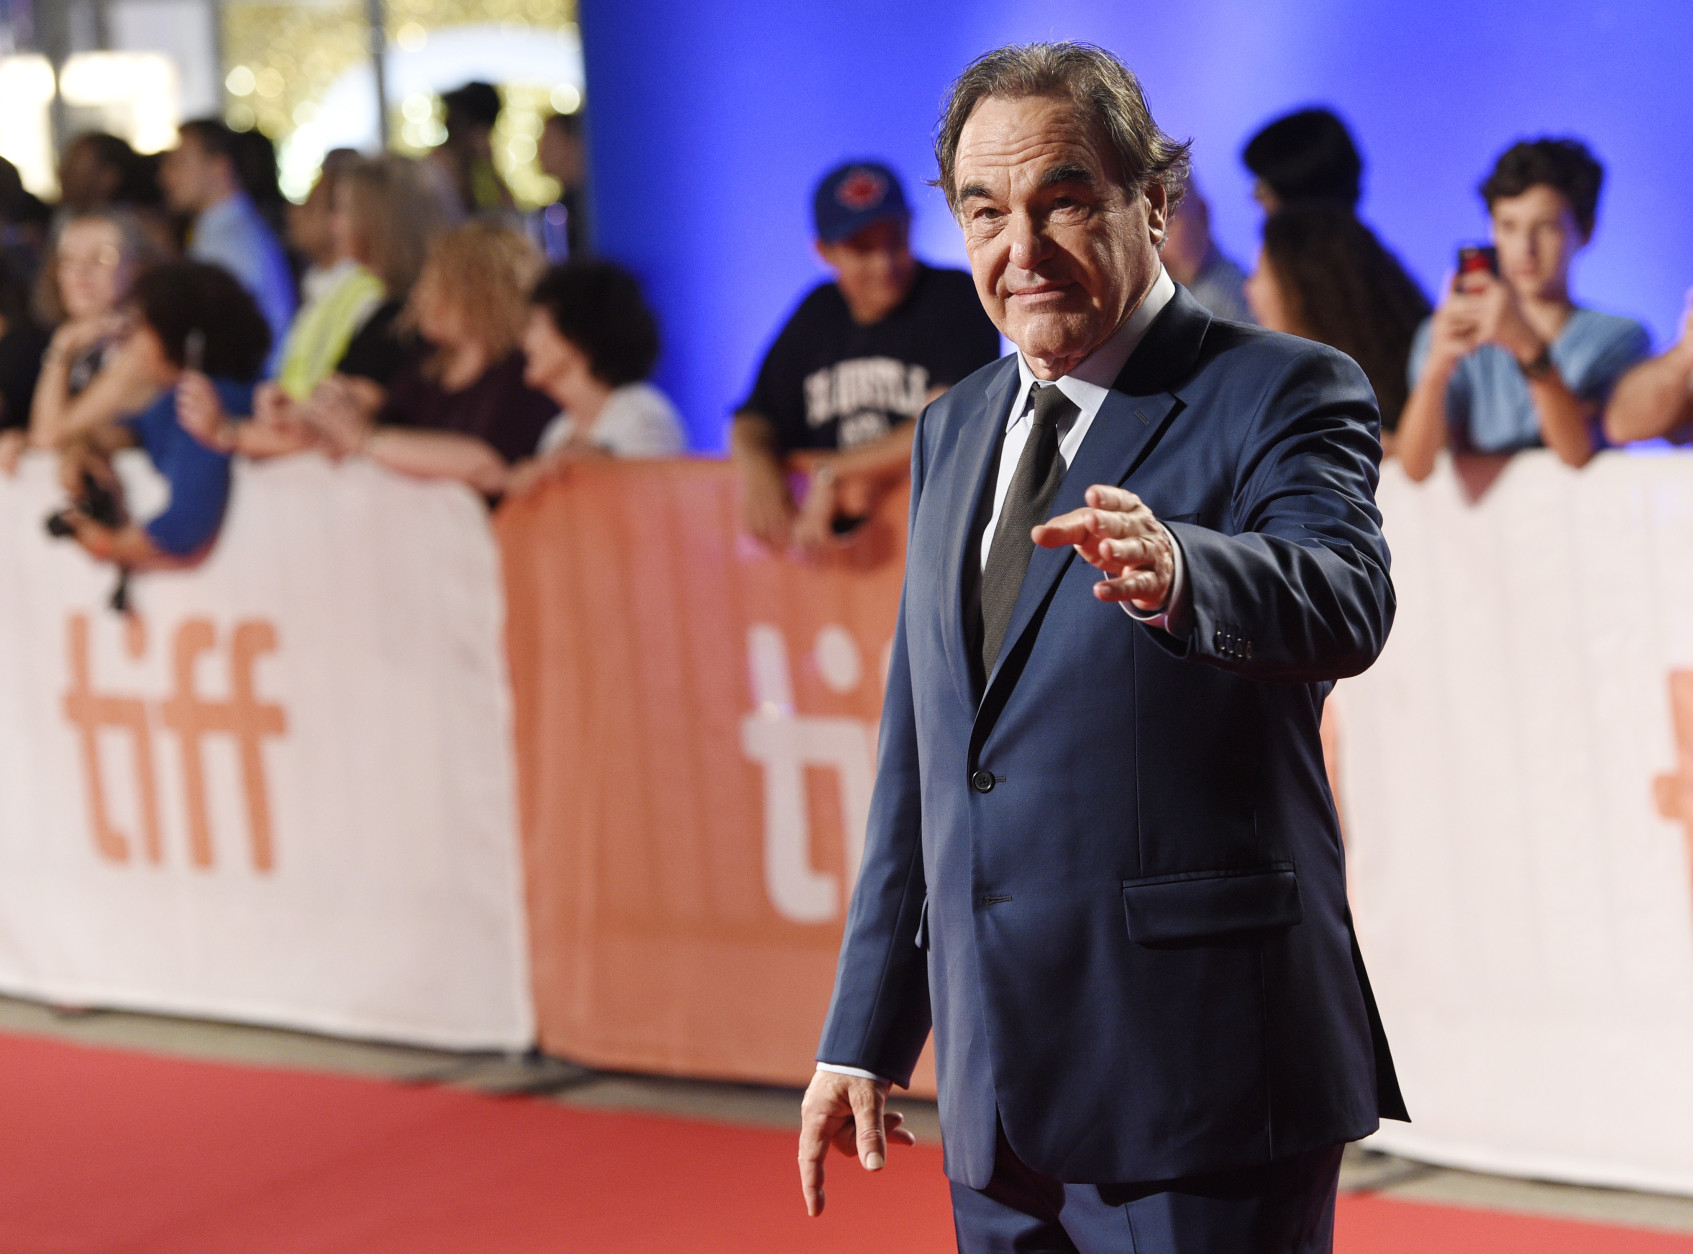 Oliver Stone, the director of "Snowden," poses at the premiere of the film on day 2 of the Toronto International Film Festival at Roy Thomson Hall on Friday, Sept. 9, 2016, in Toronto. (Photo by Chris Pizzello/Invision/AP)